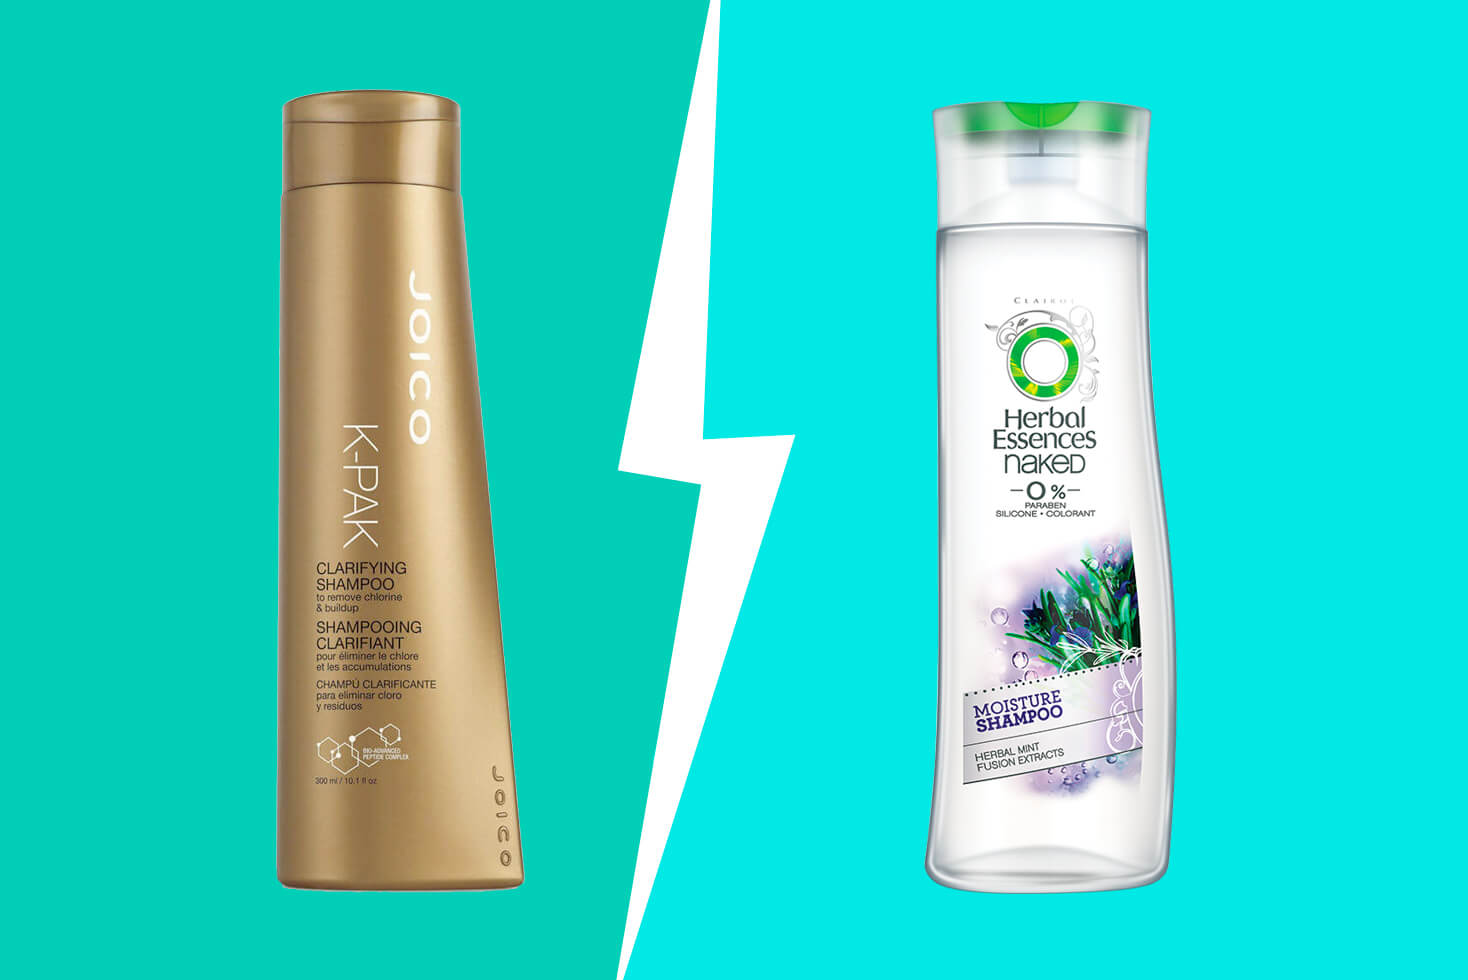 What is The Difference Between Clarifying Shampoo and Regular Shampoo?